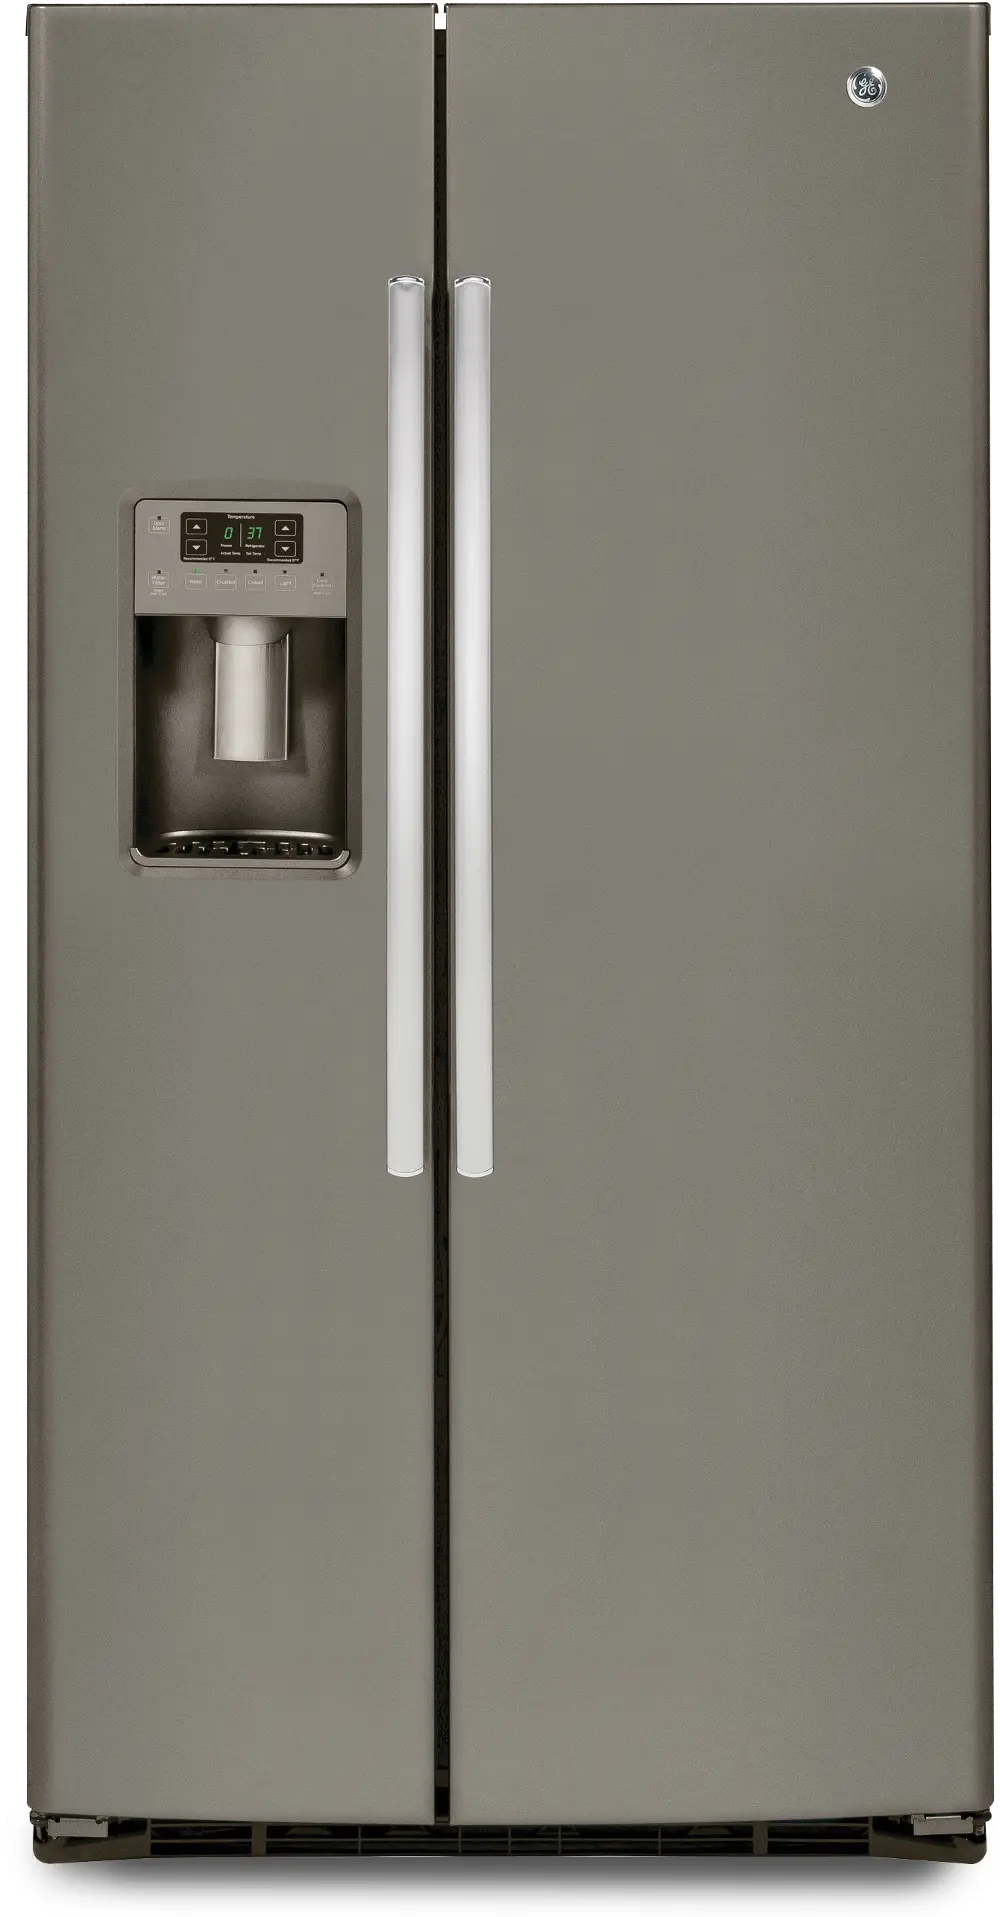 GSE25HMHES GE ENERGY STAR 25.3 Cu. Ft. Side-By-Side Refrigerator - Slate-1